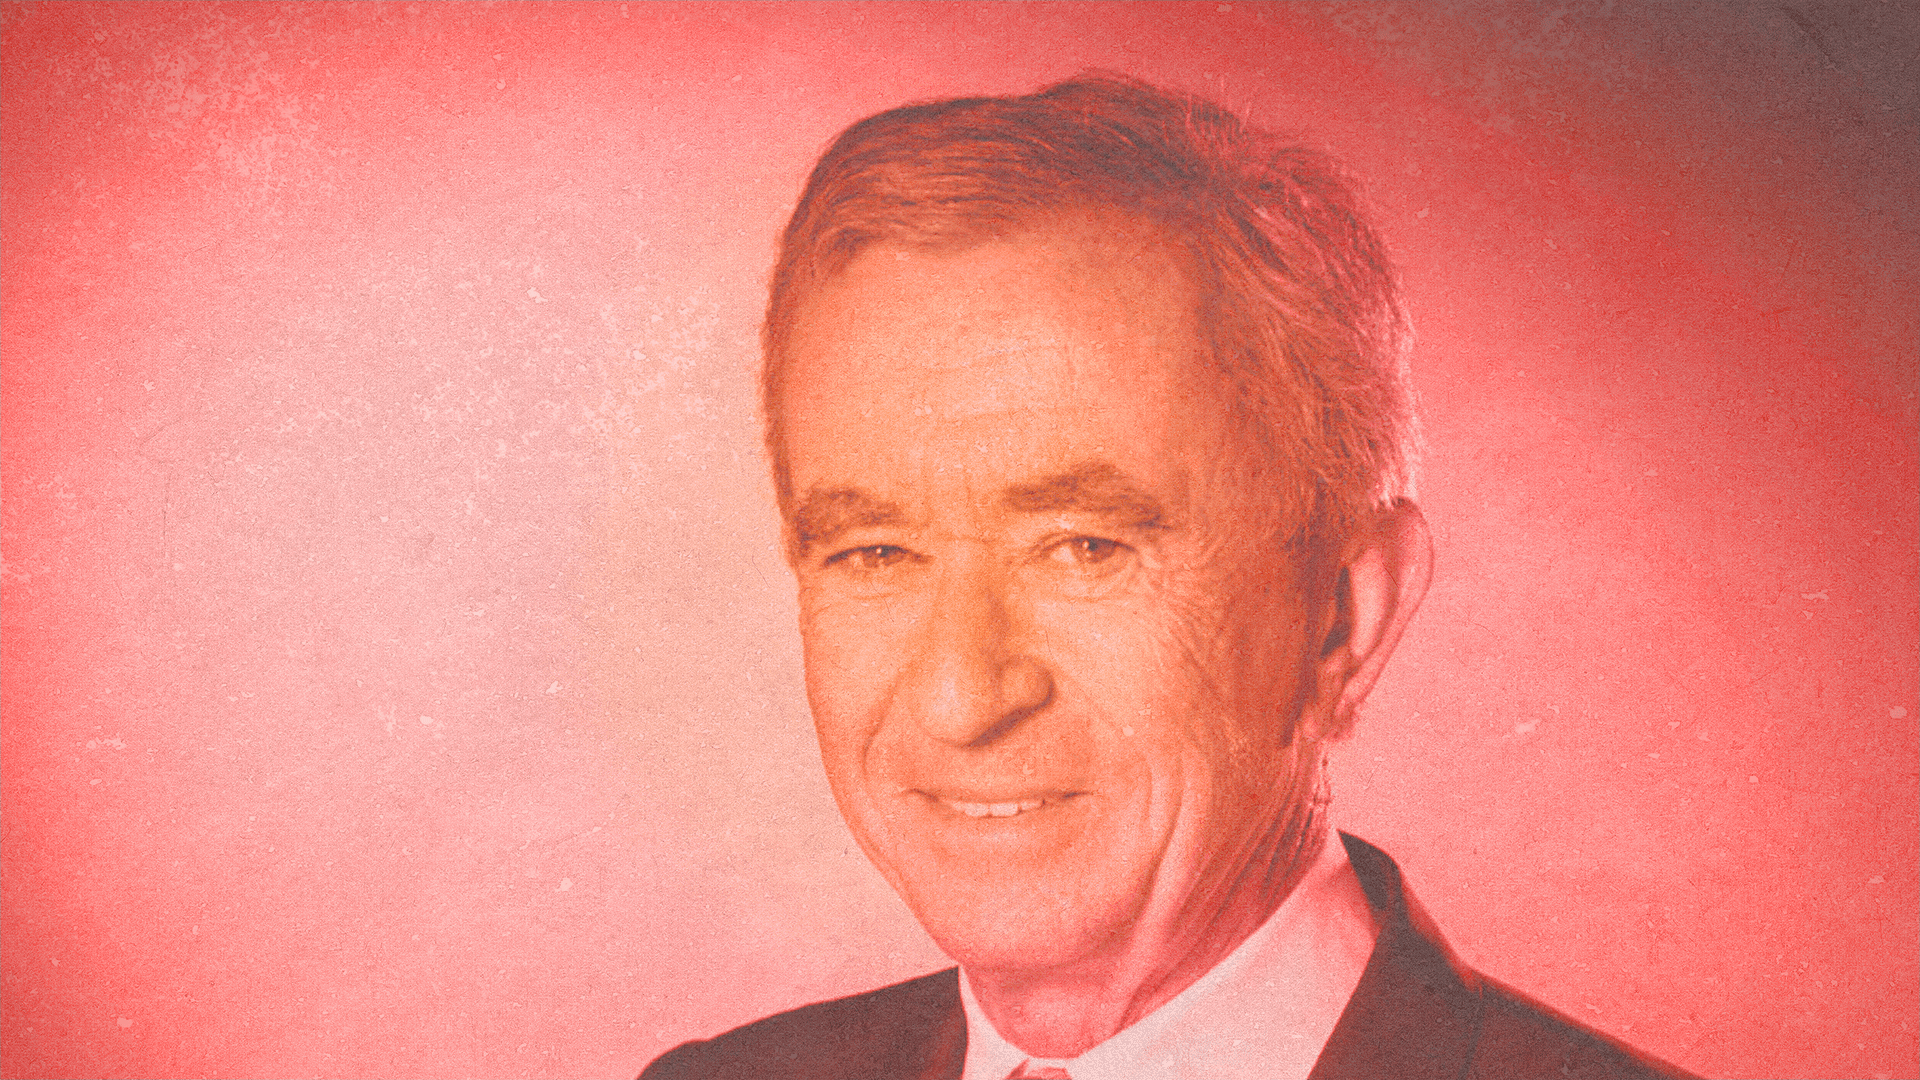 Who is Bernard Arnault, world's richest person? 10 things to know